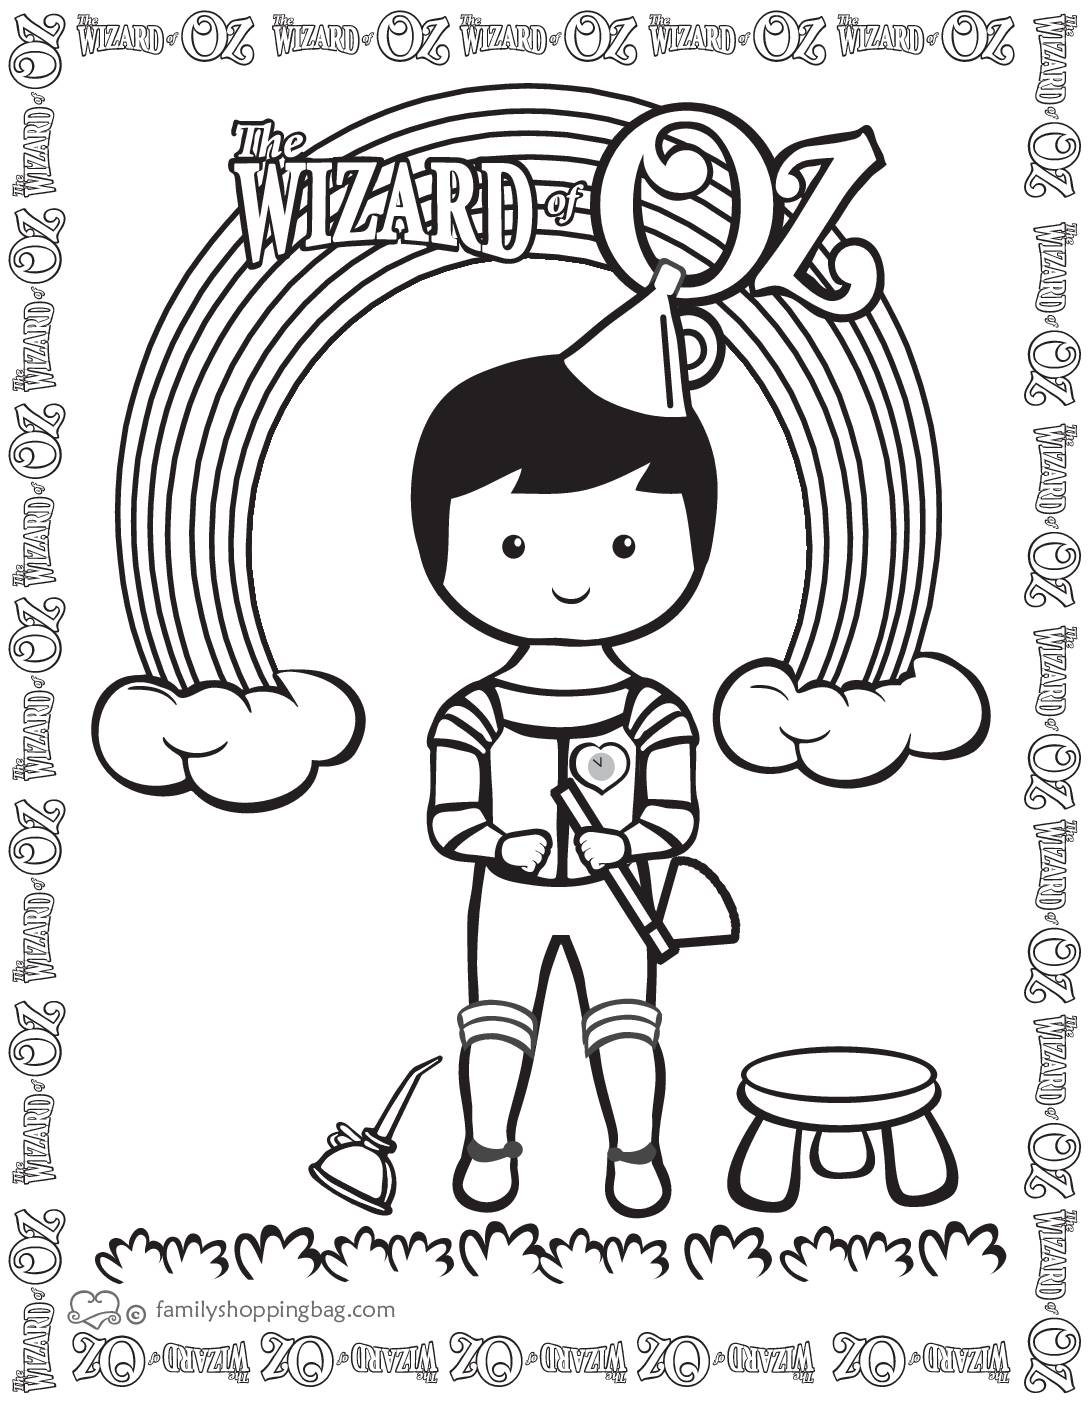 Coloring Page 6 Wizard of Oz Coloring Pages